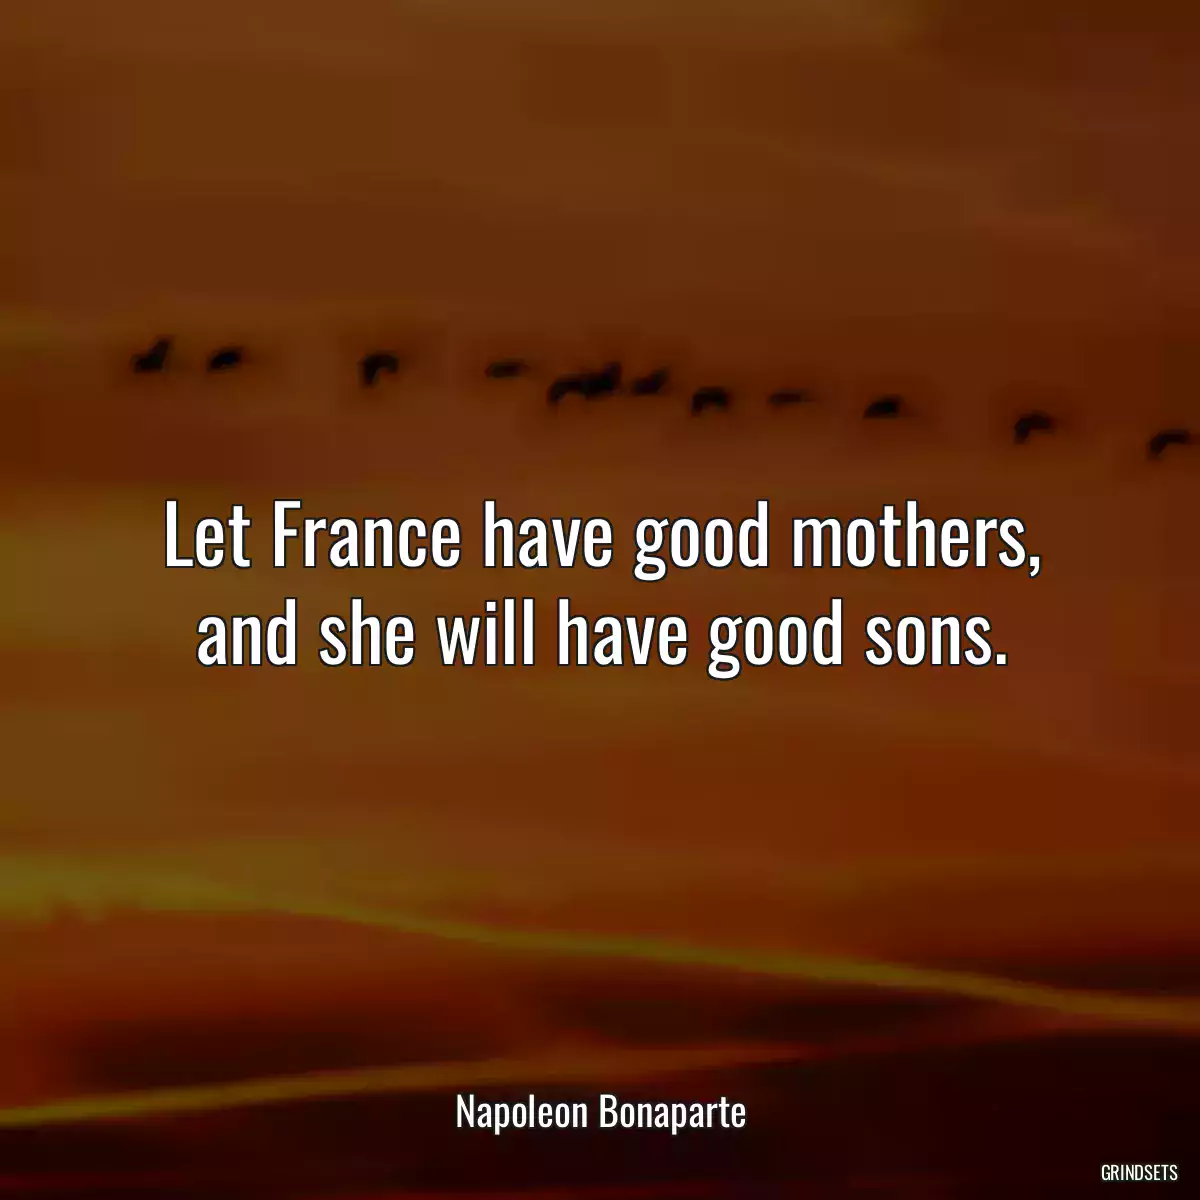 Let France have good mothers, and she will have good sons.